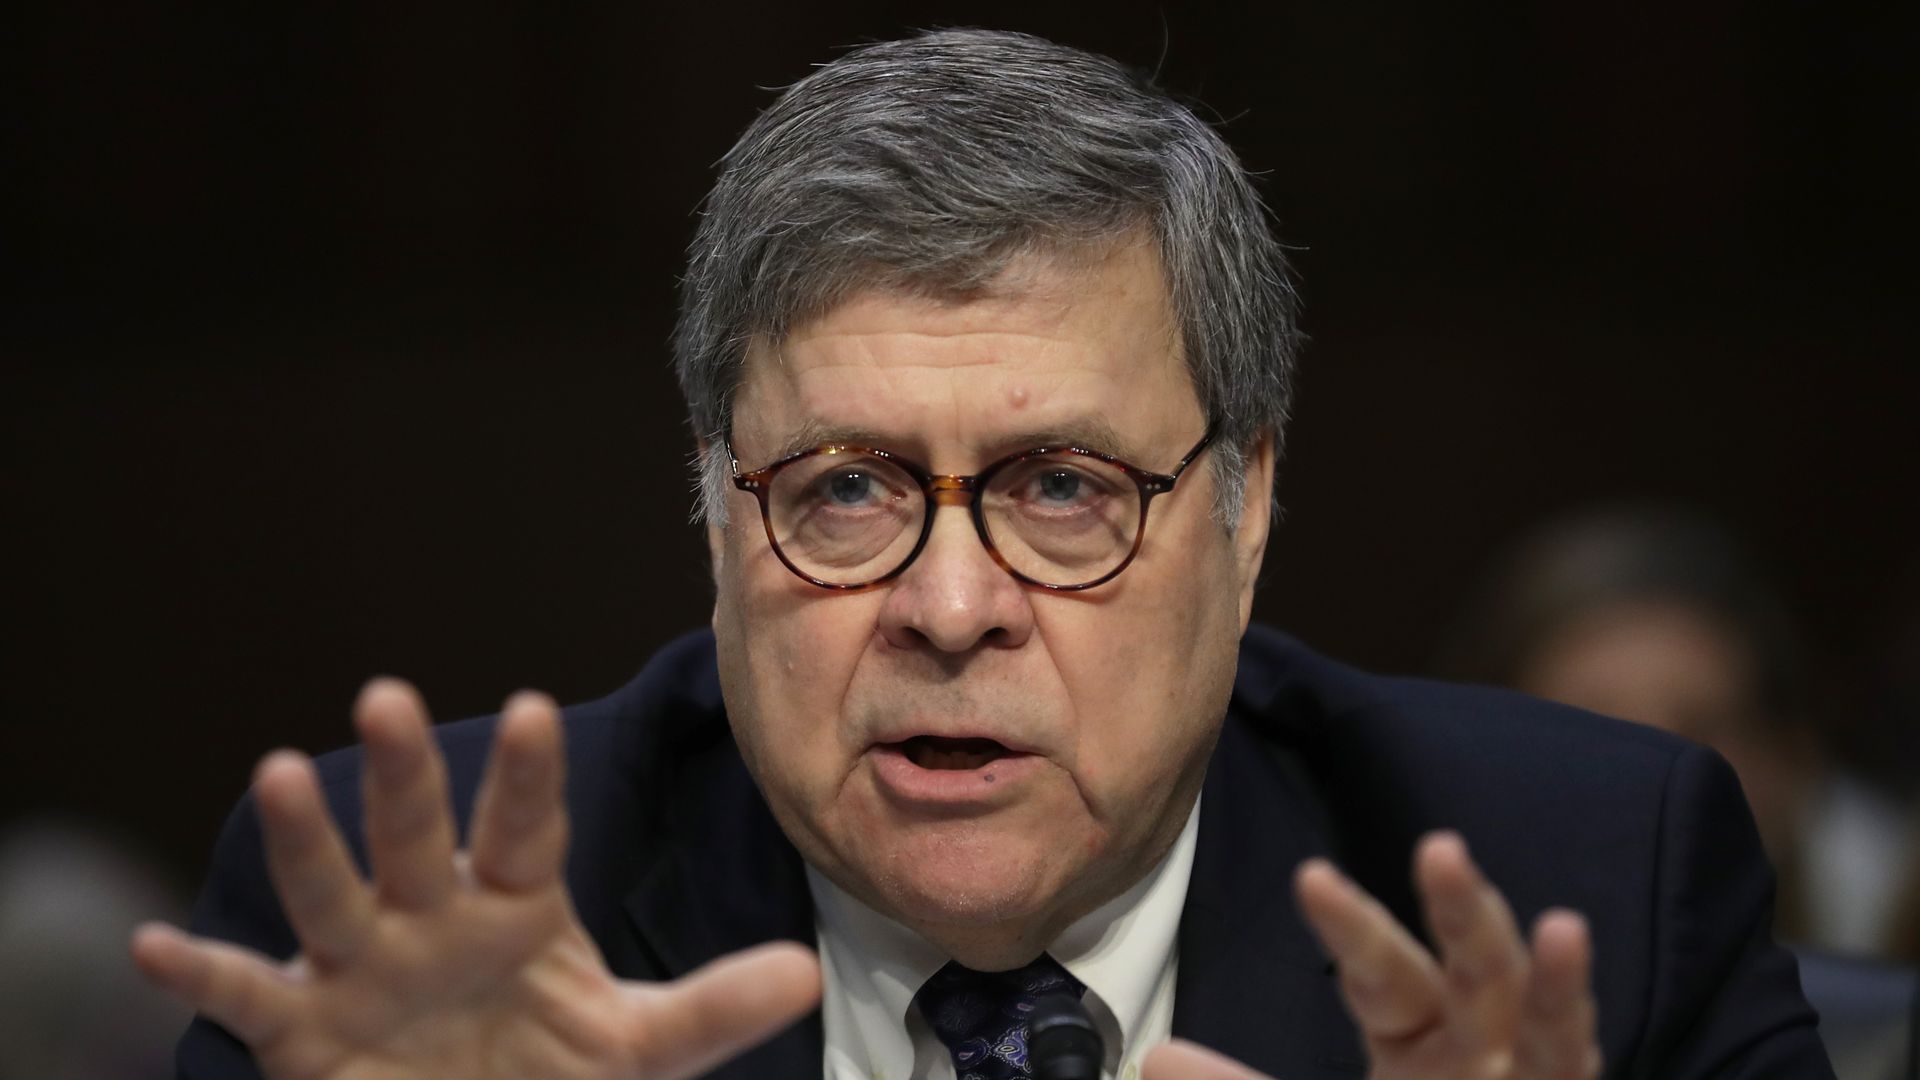 In this image, Barr speaks with both hands outstretched towards the camera. 